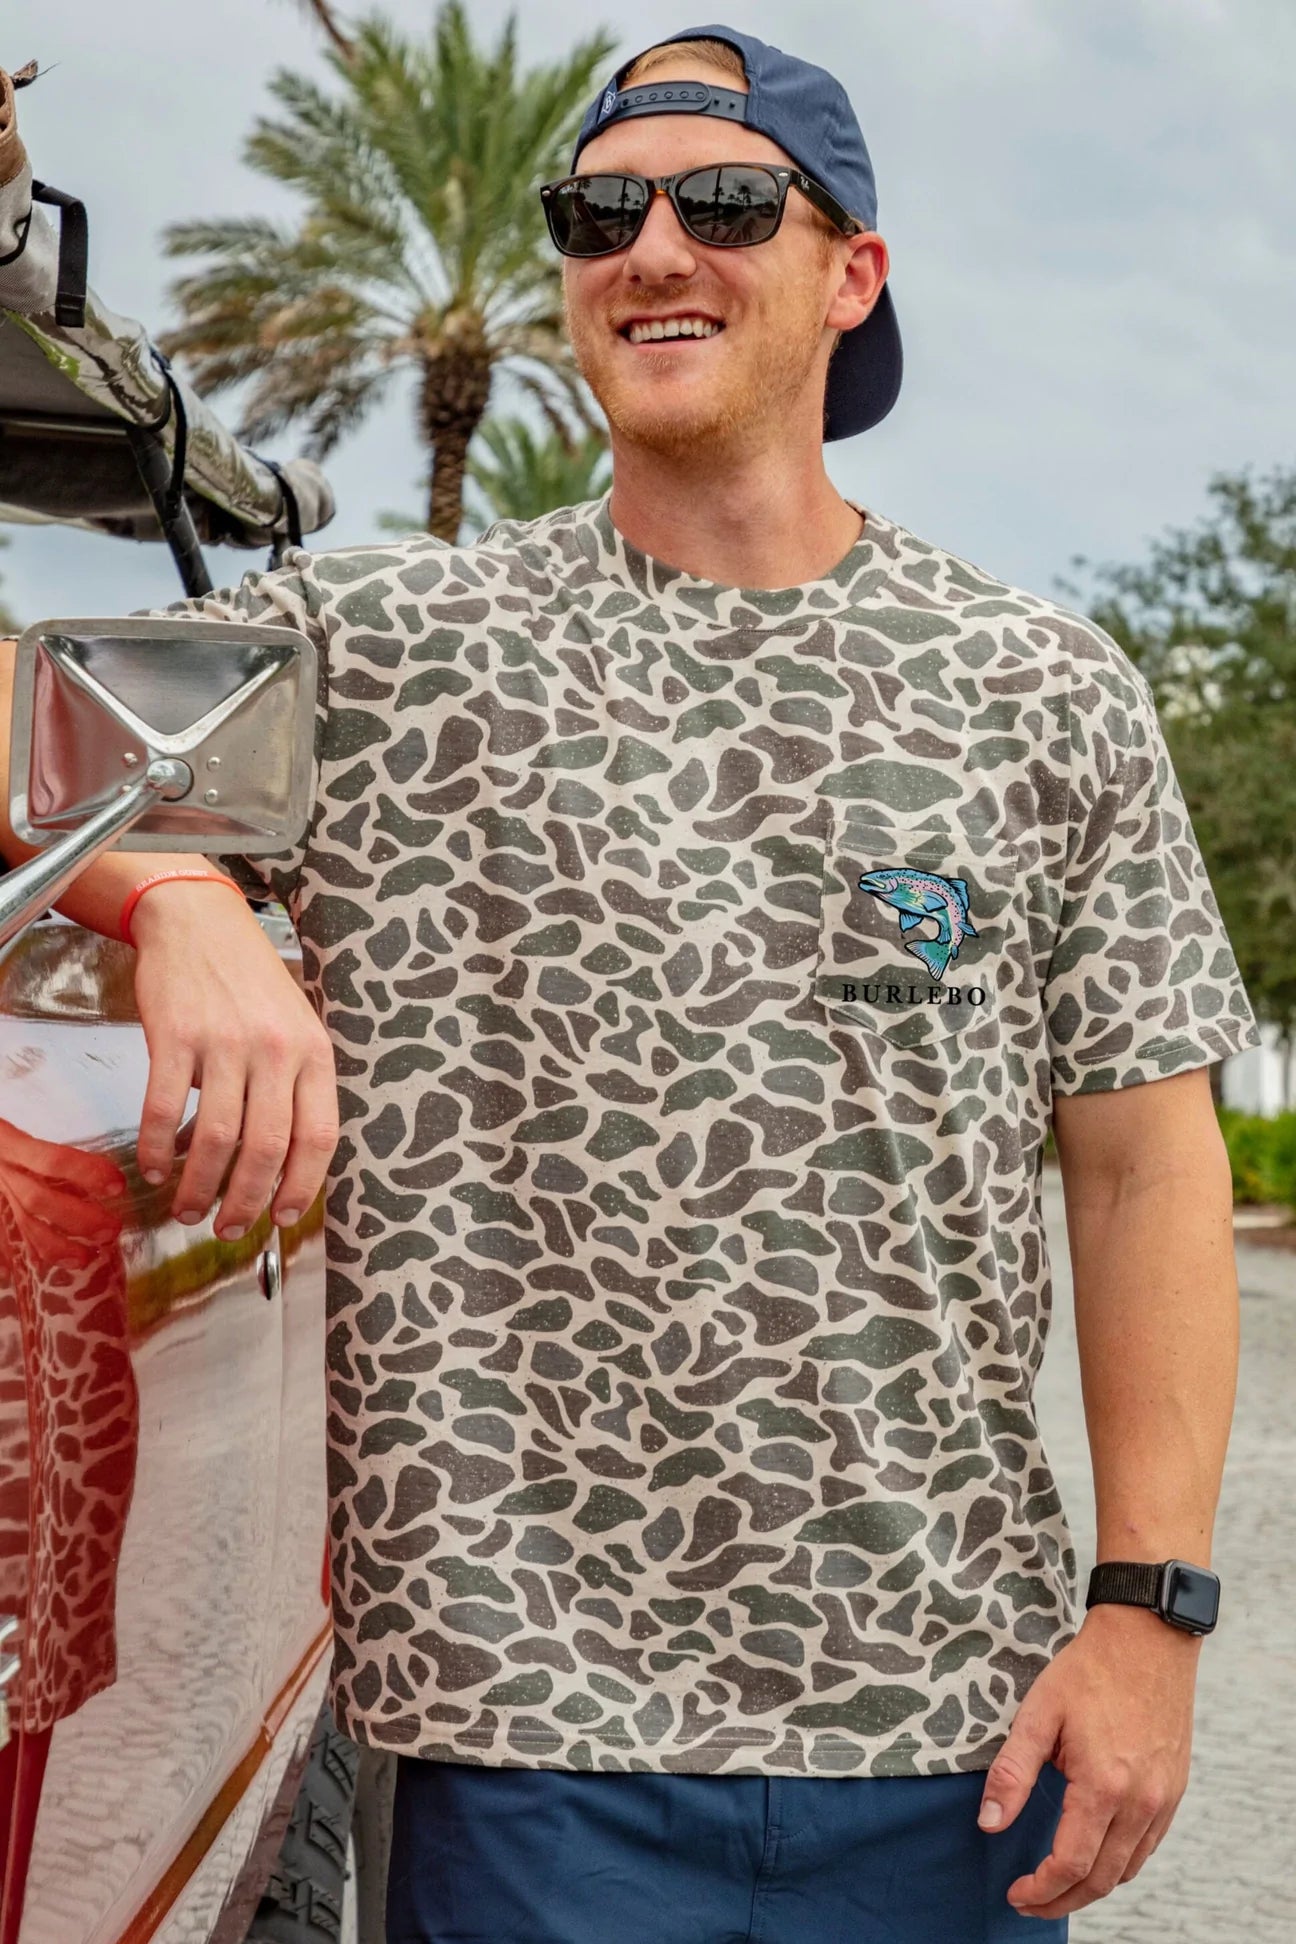 Burlebo Camo Tee with Trout Pocket